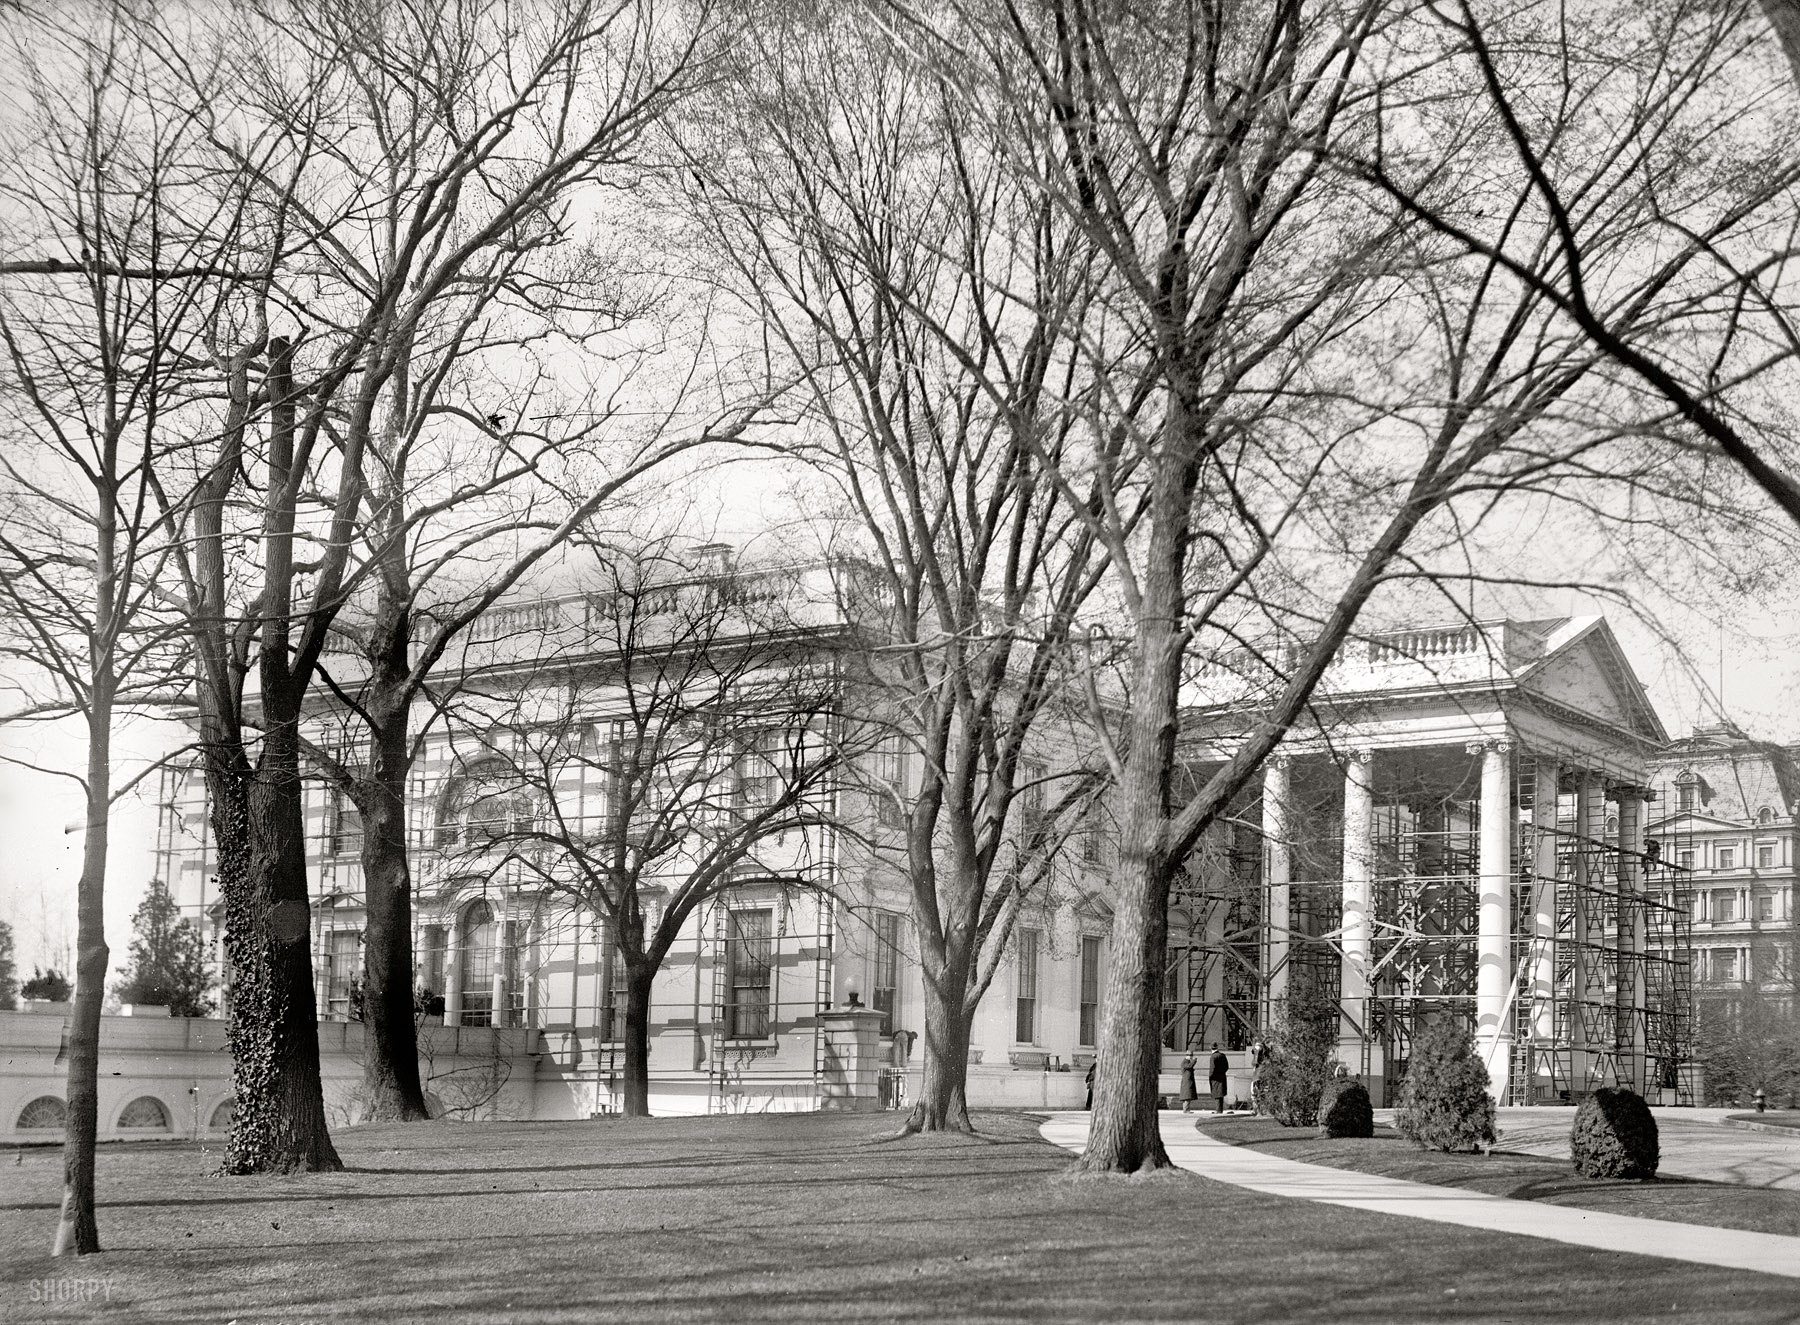 March 1915. "White House, scaffolding on North Portico and east side." As part of a "Clean-Up, Paint-Up" campaign sponsored by the Master House Painters and Decorators Association, the White House and Mount Vernon each got a fresh coat of paint. Harris & Ewing Collection glass negative. View full size.